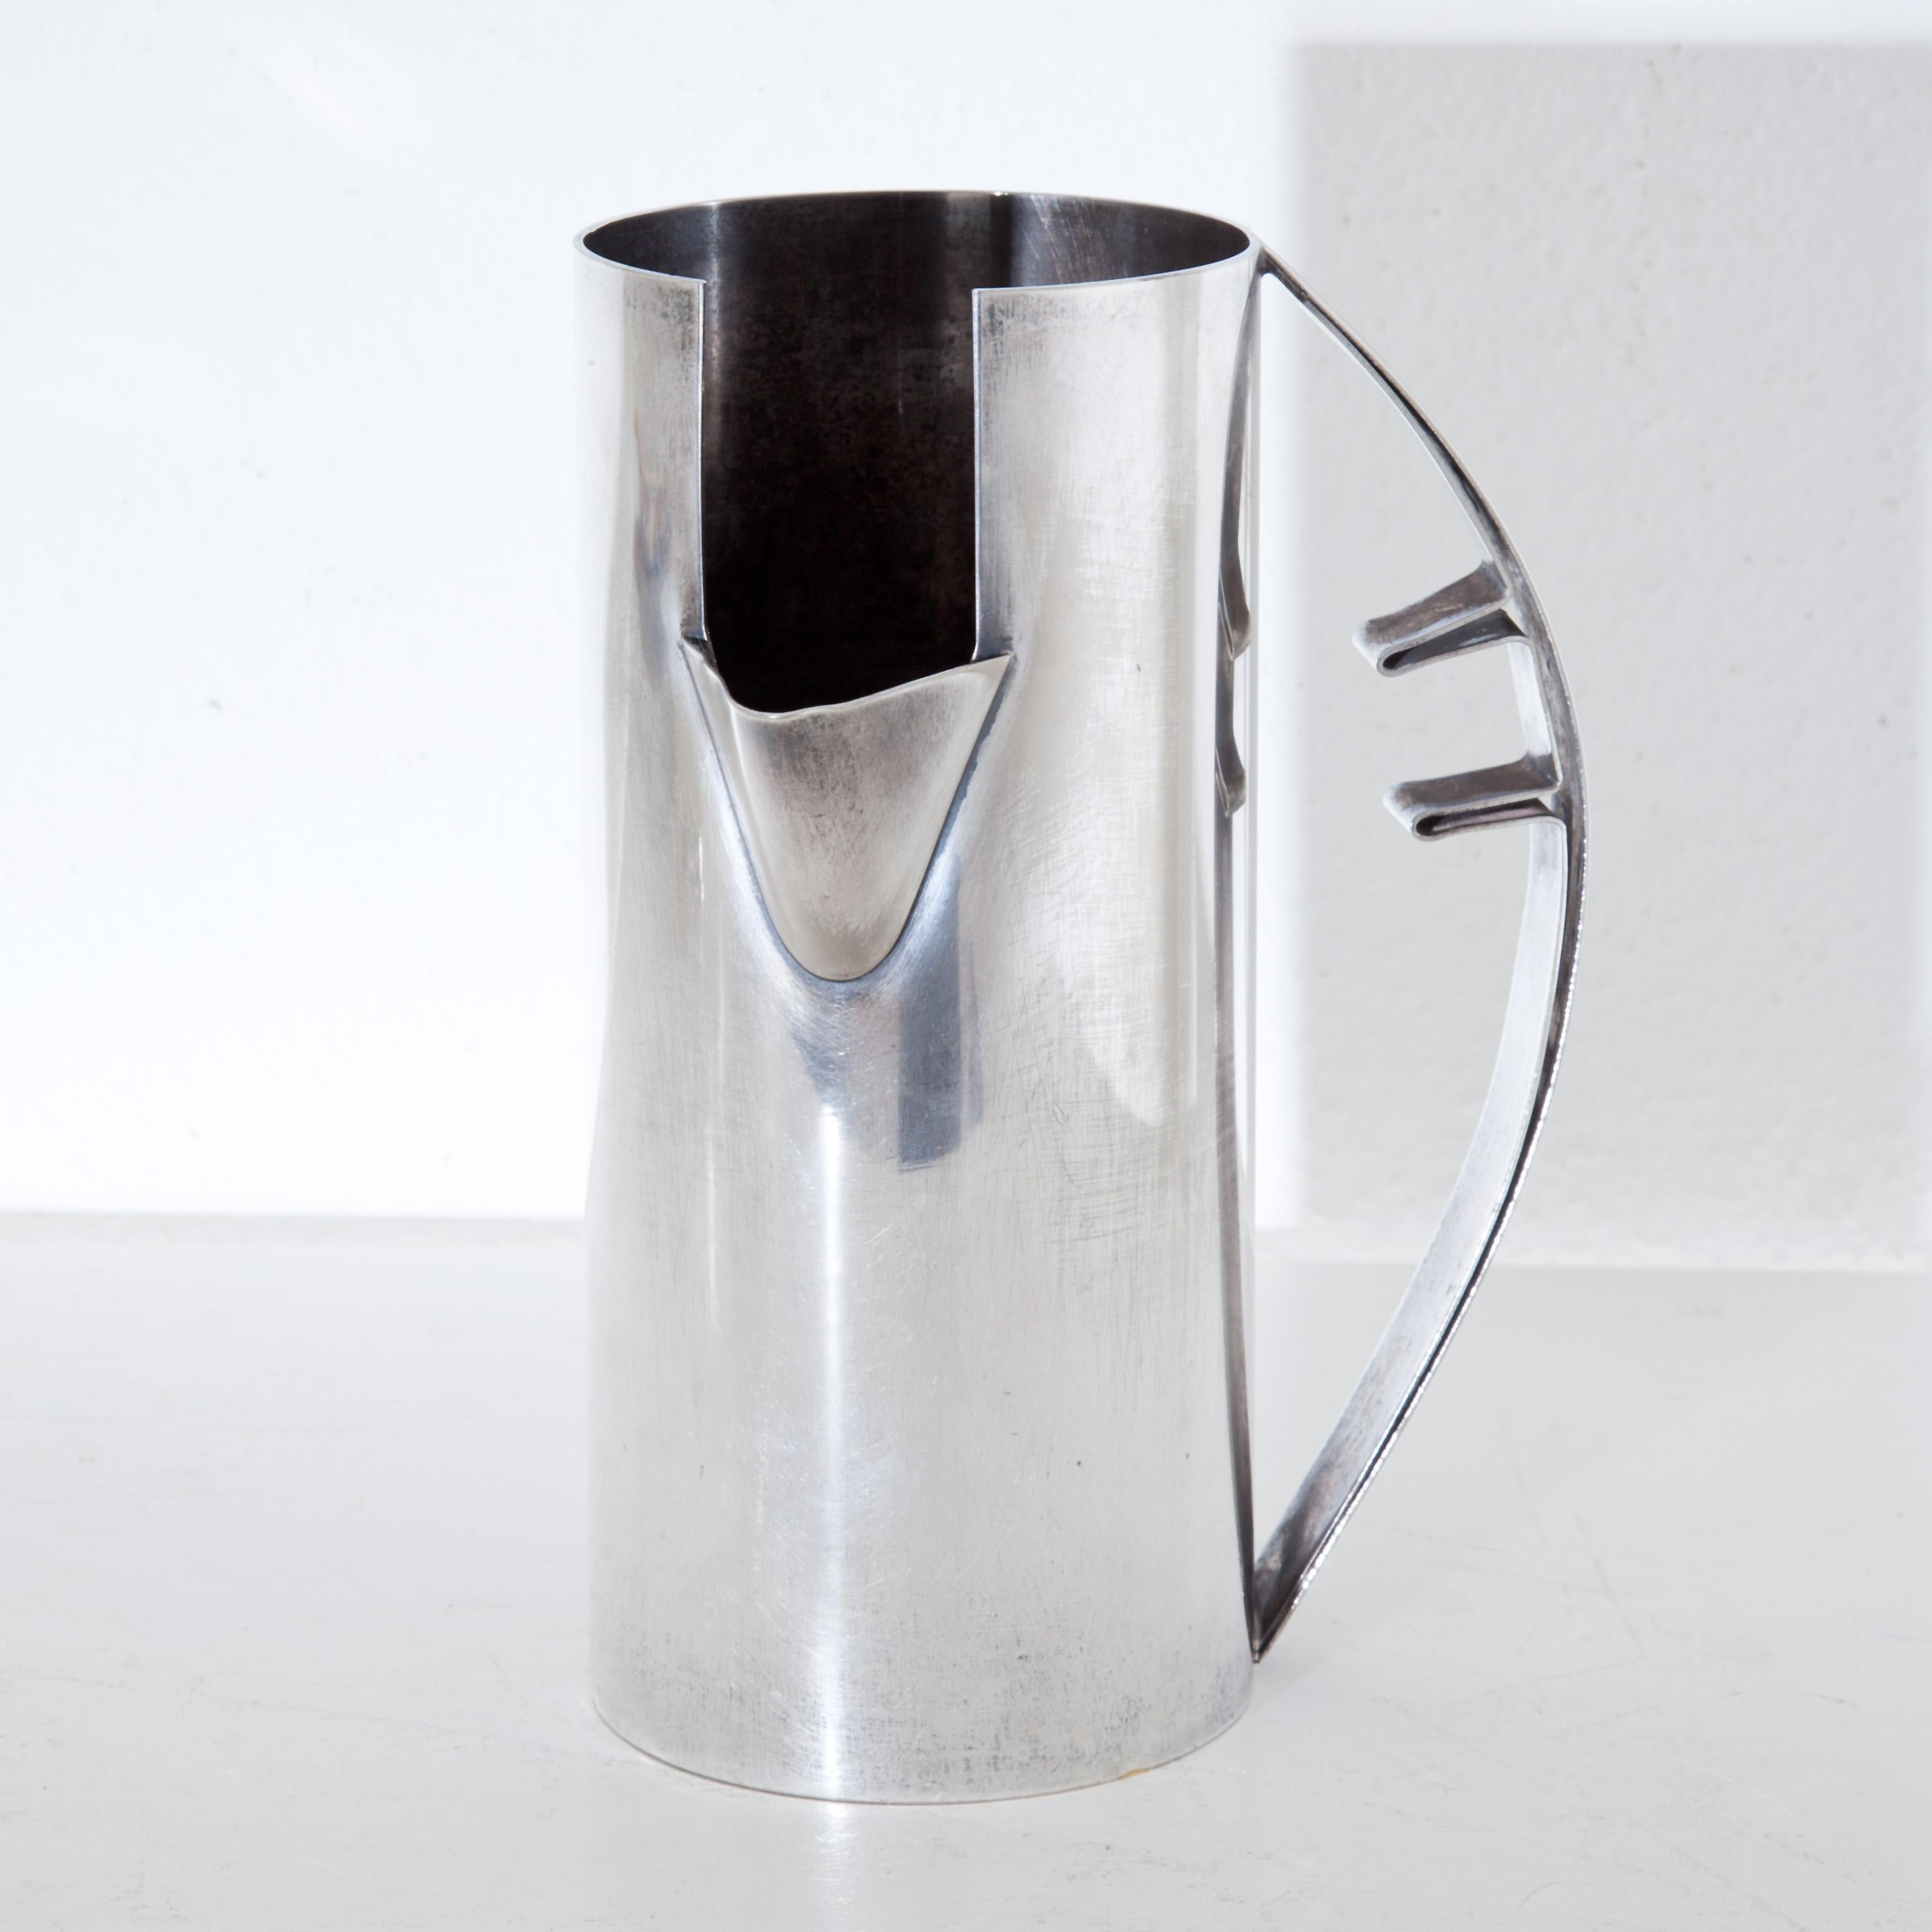 Silver plated Carlo Scarpa pitcher in Minimalist design. Stamped on the base Carlo Scarpa per Cleto Munari and 1000/1000. One small ship in the silver plate at the bottom.